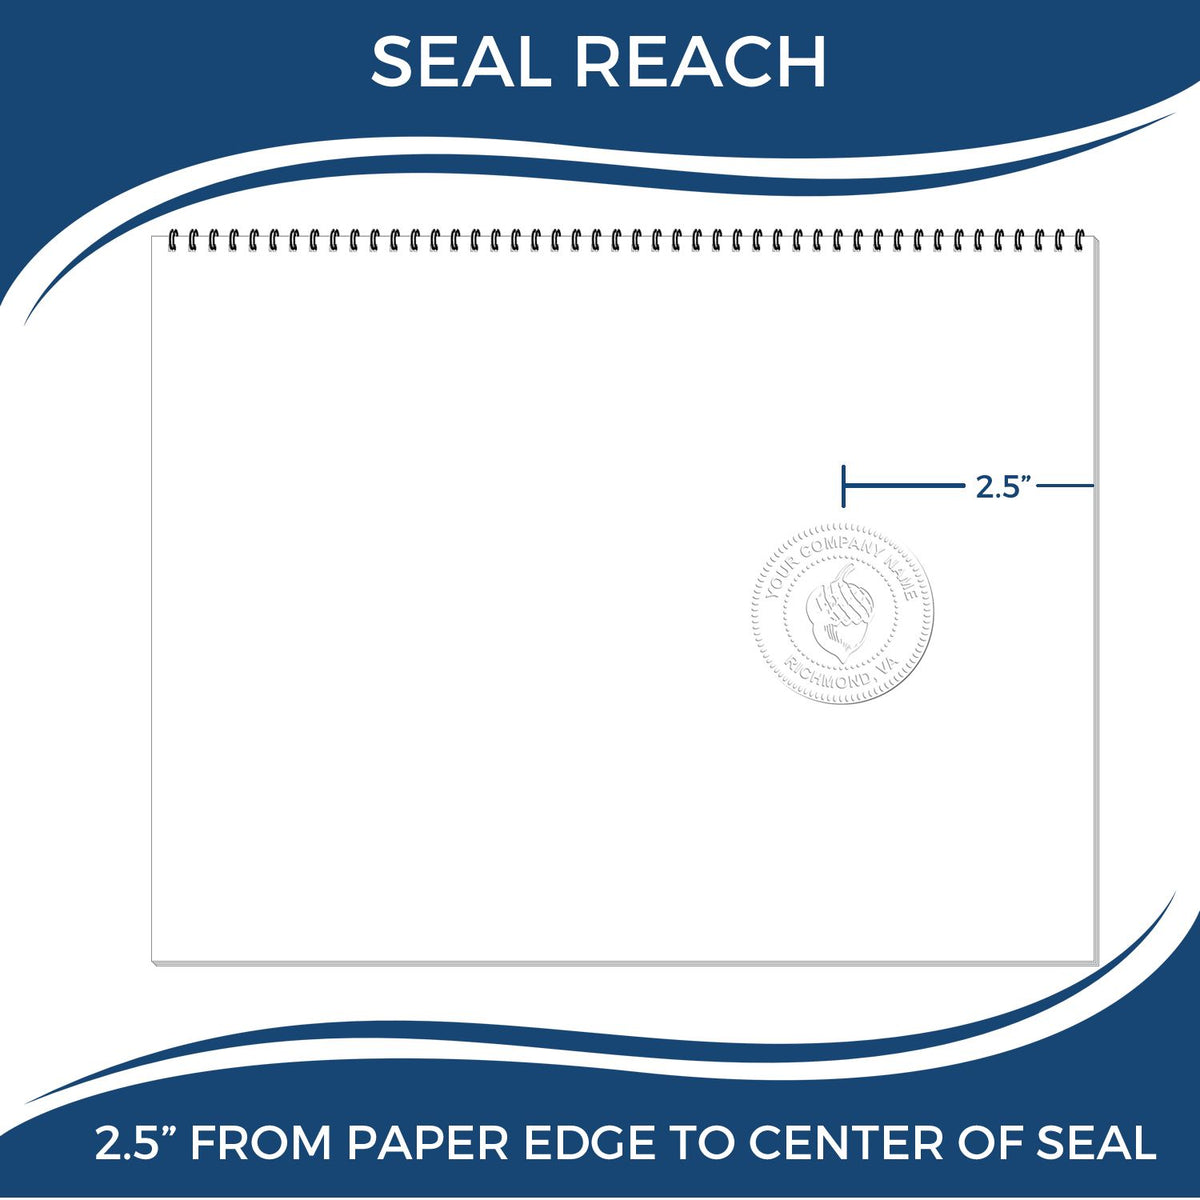 An infographic showing the seal reach which is represented by a ruler and a miniature seal image of the Long Reach Colorado Geology Seal